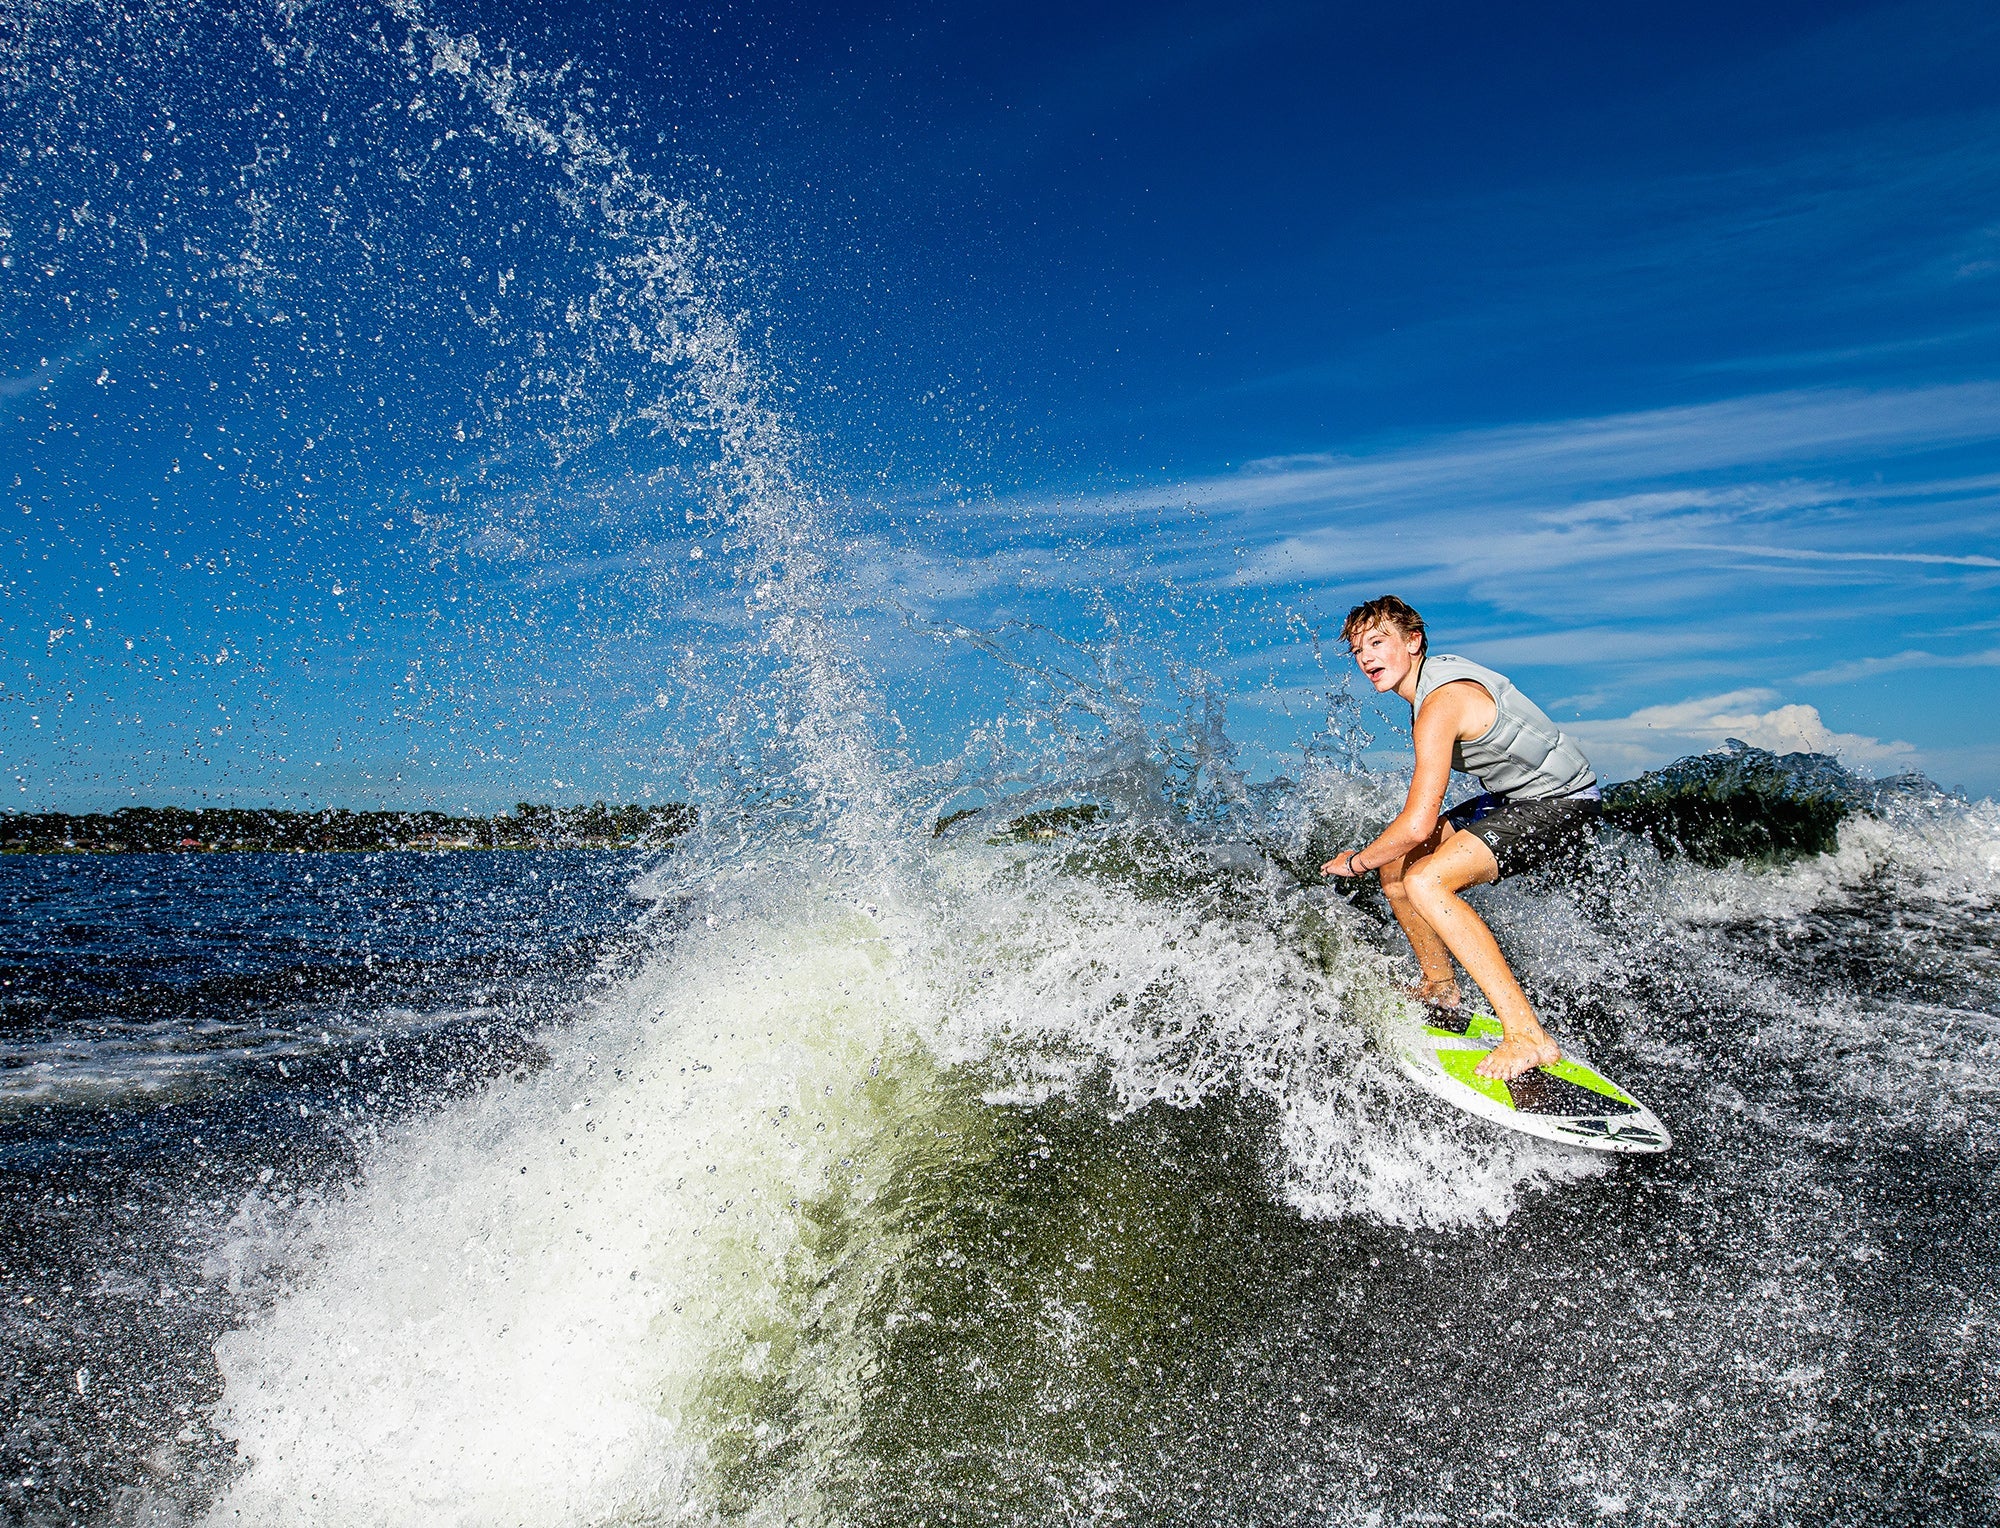 A man seamlessly balancing on a Phase 5 2023 Aku V2 Wakesurf Board as he rides a powerful wave with impressive speed.